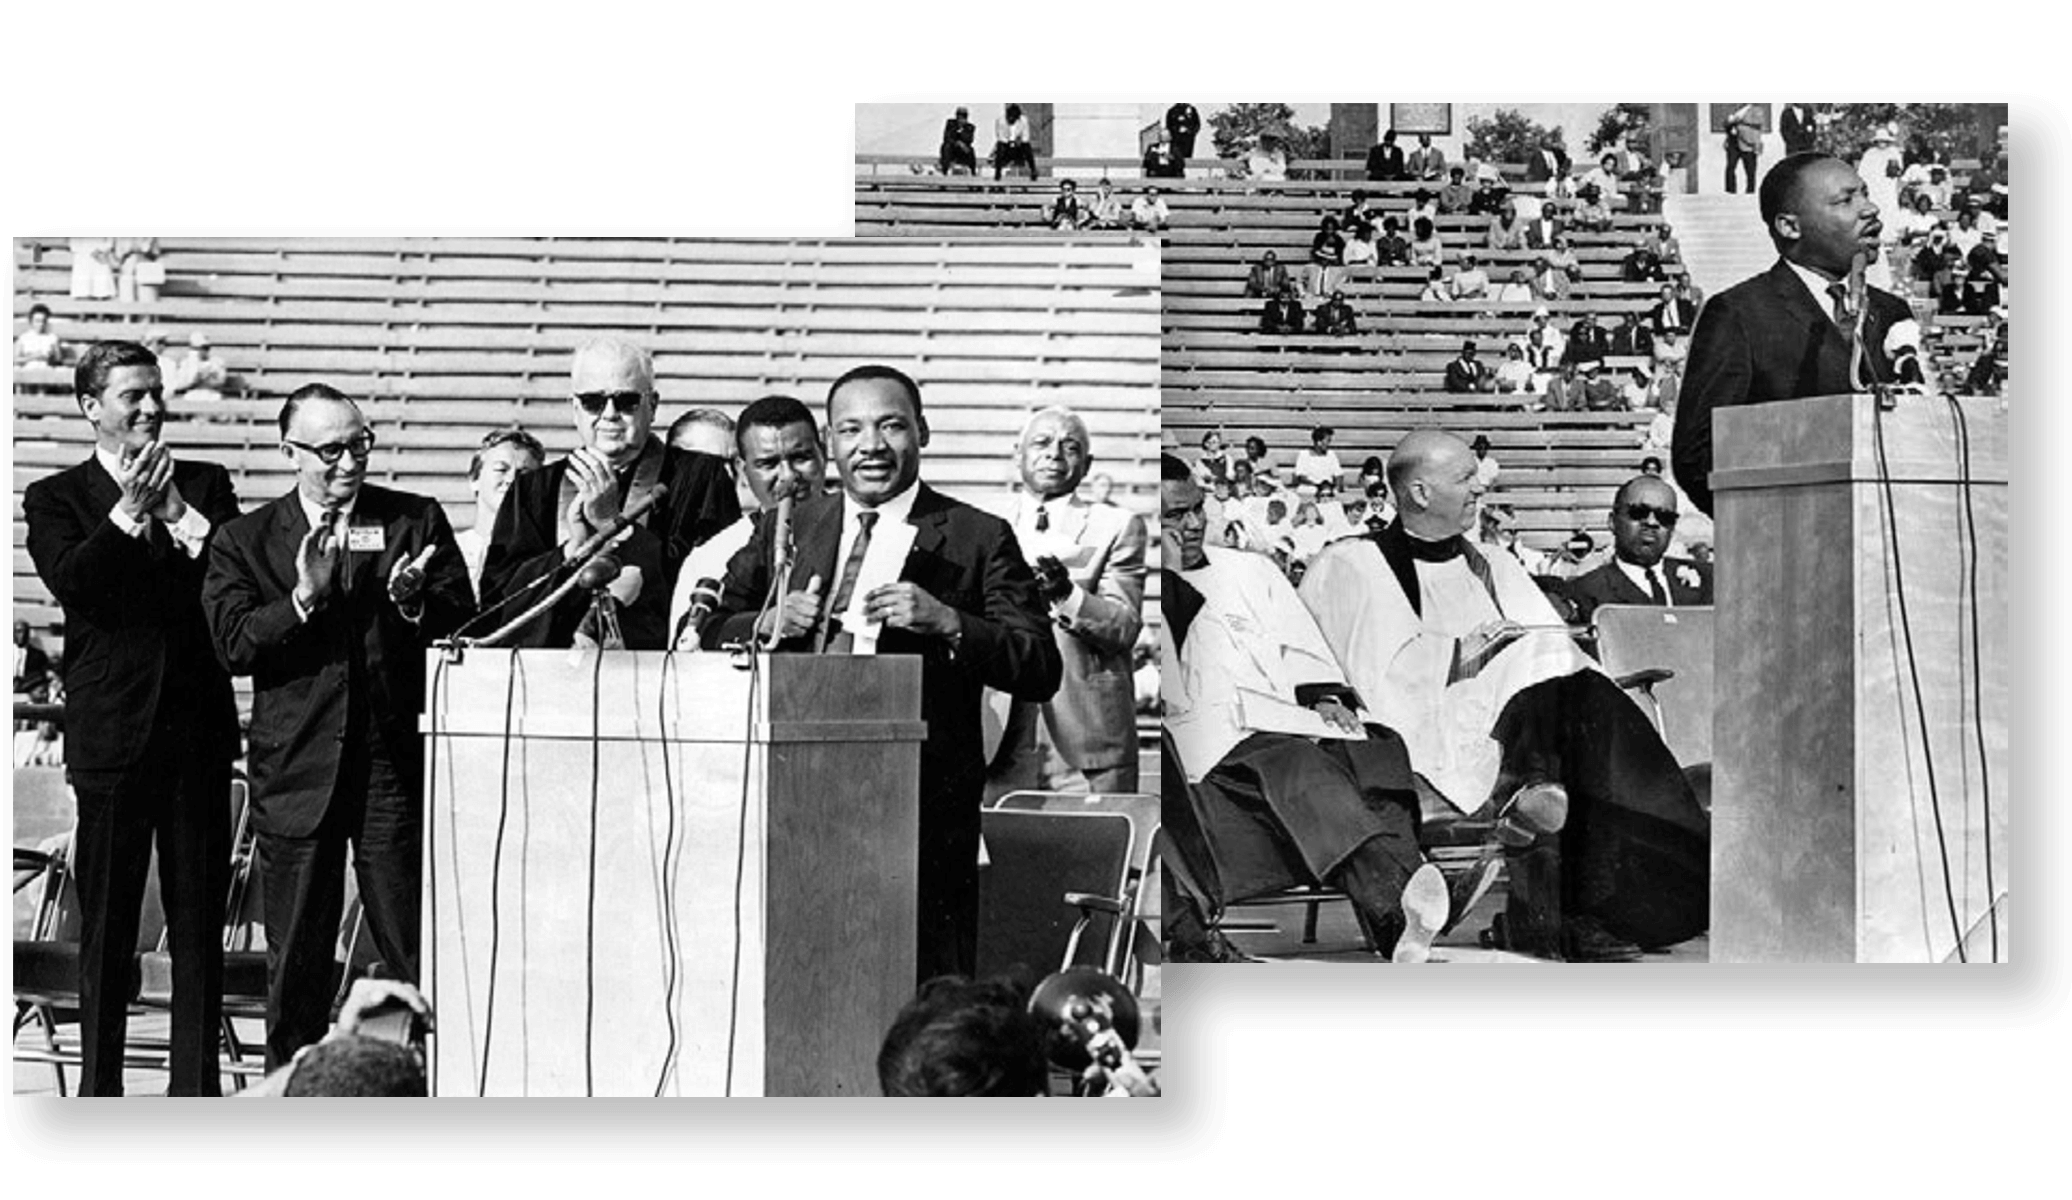 Human Dignity Event to Have   Dr. King at Coliseum